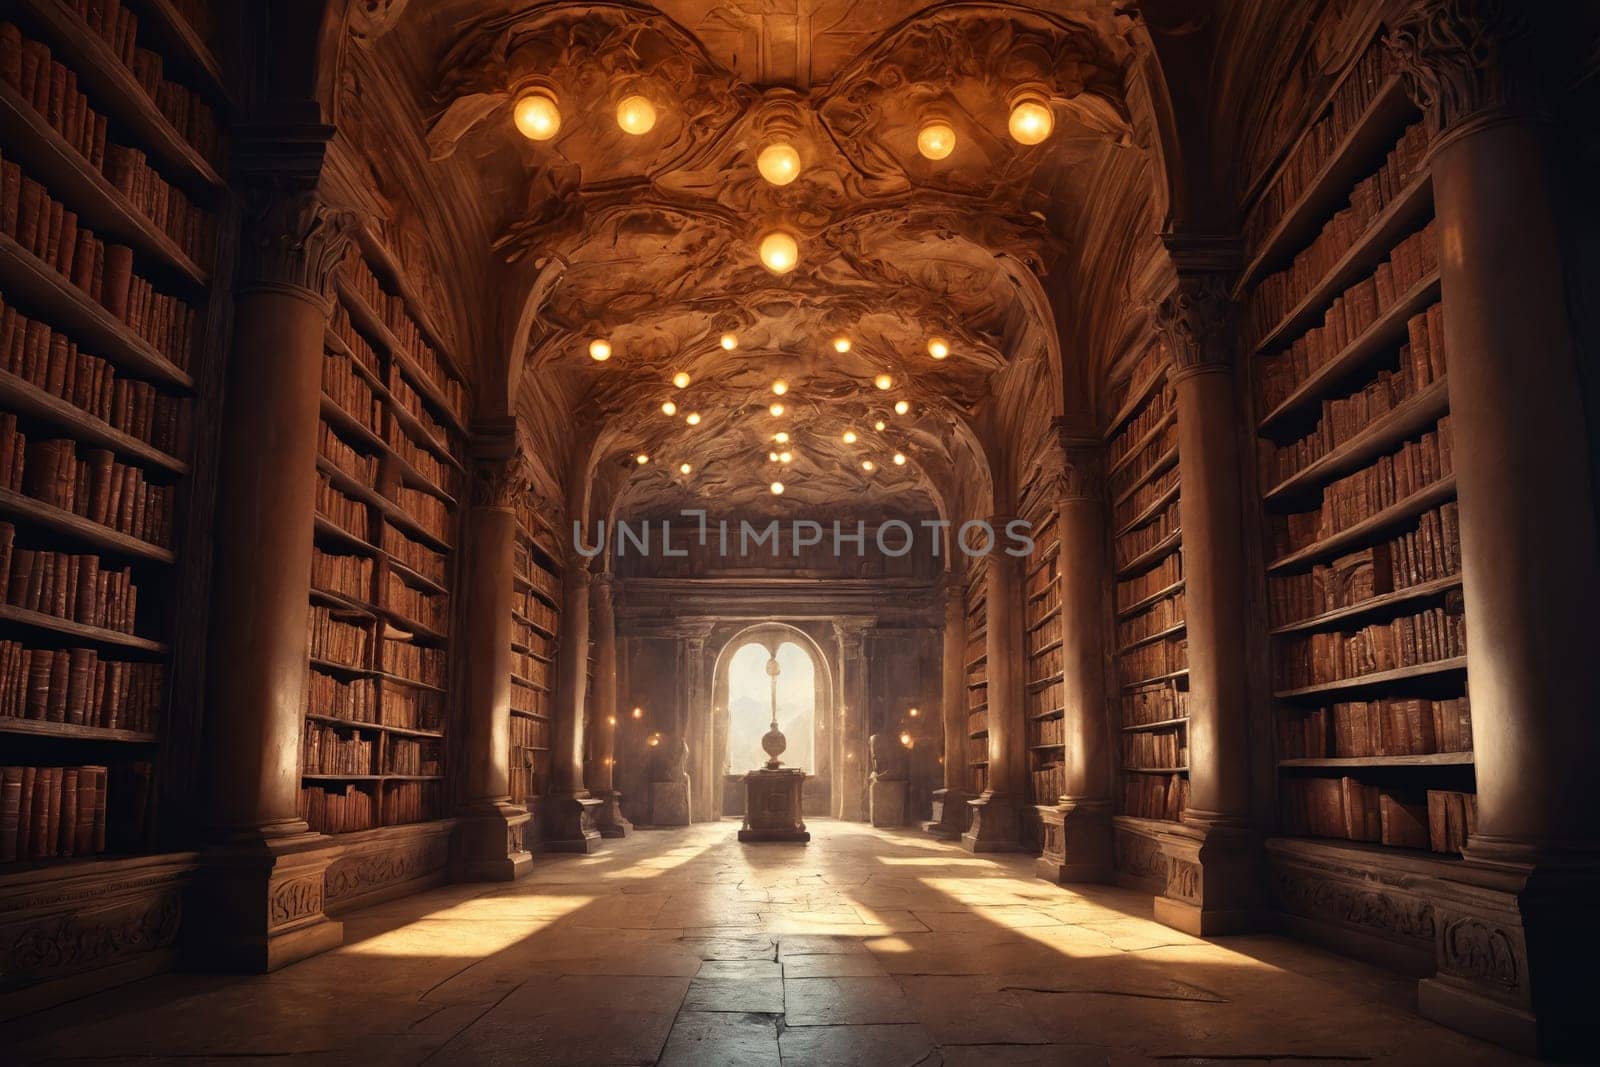 Behold a grand library, richly adorned with wooden bookshelves filled with layers of knowledge.